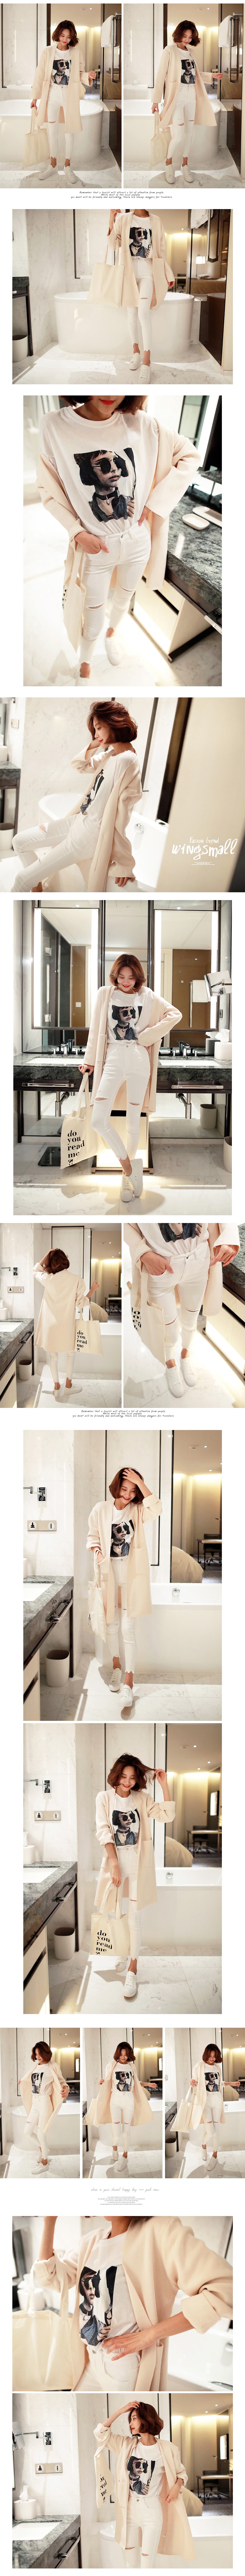 KOREA Open-Front Pocket Cardigan #Beige One Size(S-M) [Free Shipping]